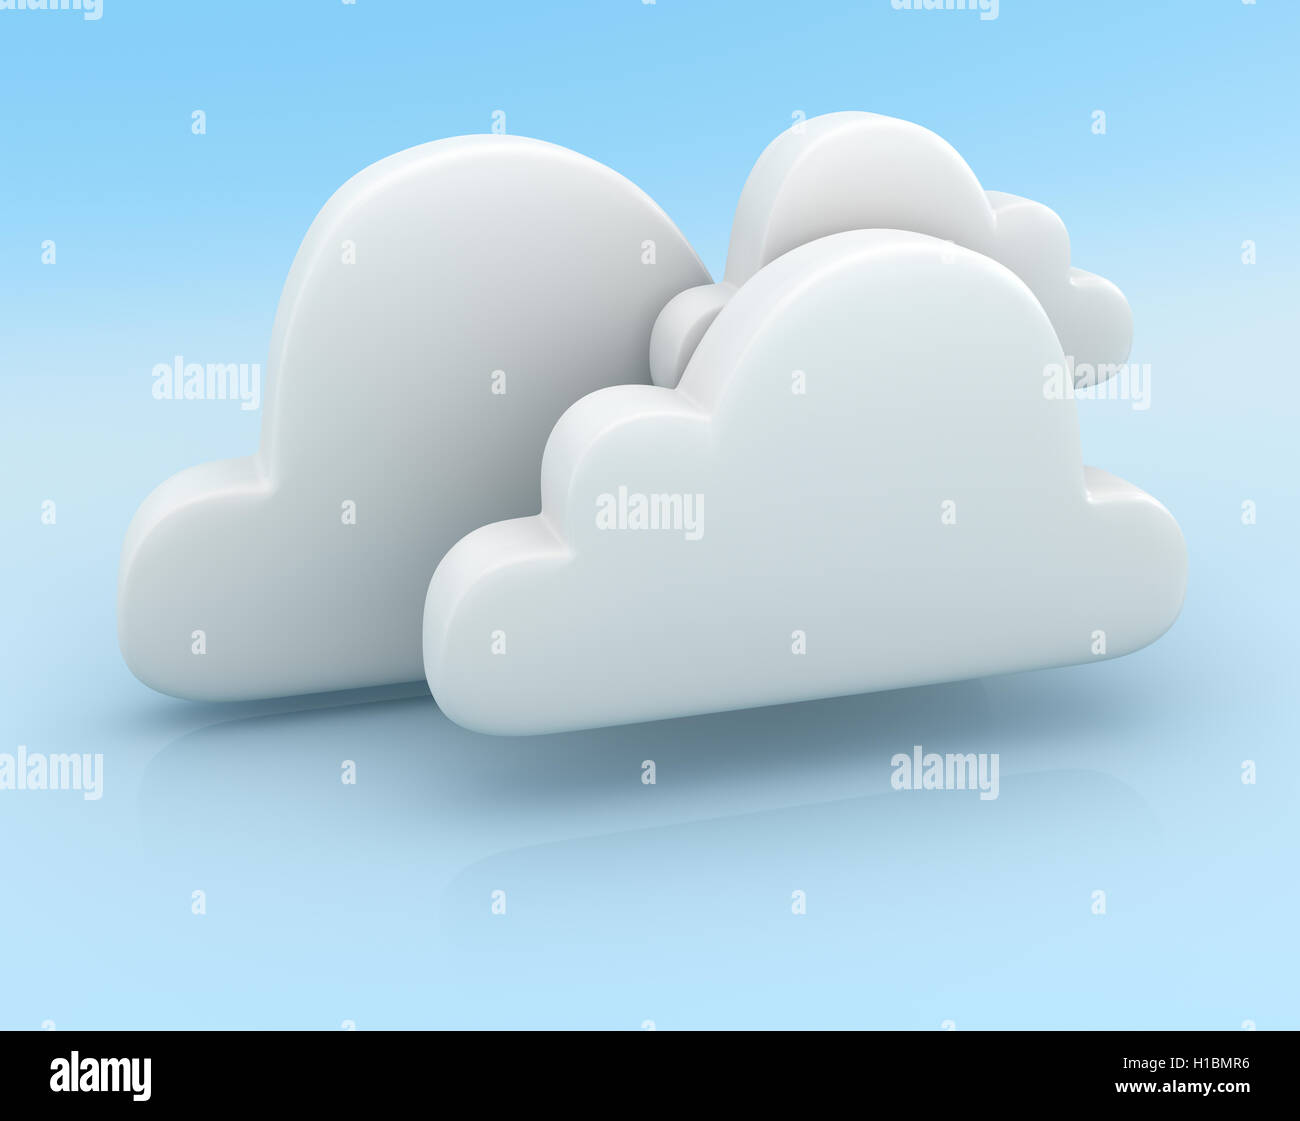 Cloud system concept Stock Photo